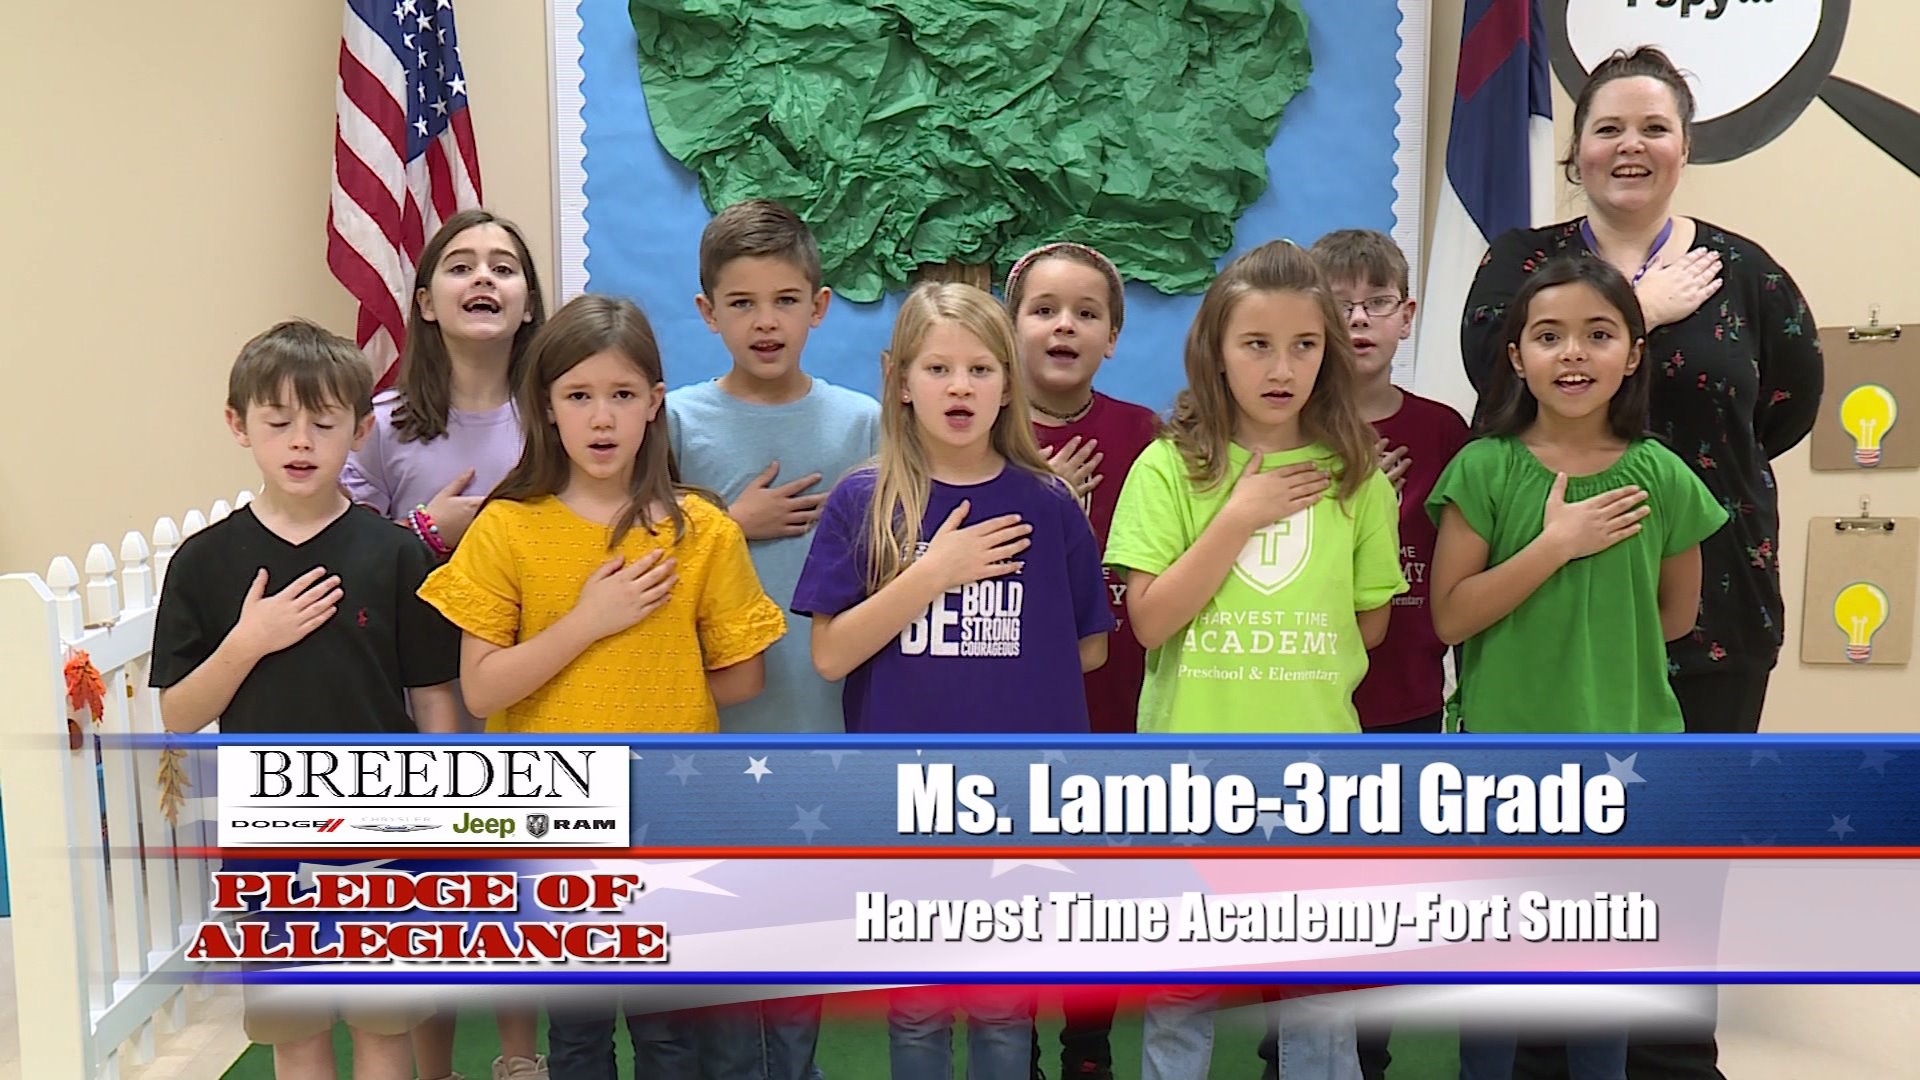 Ms. Lambe -3rd Grade Harvest Time Academy, Fort Smith